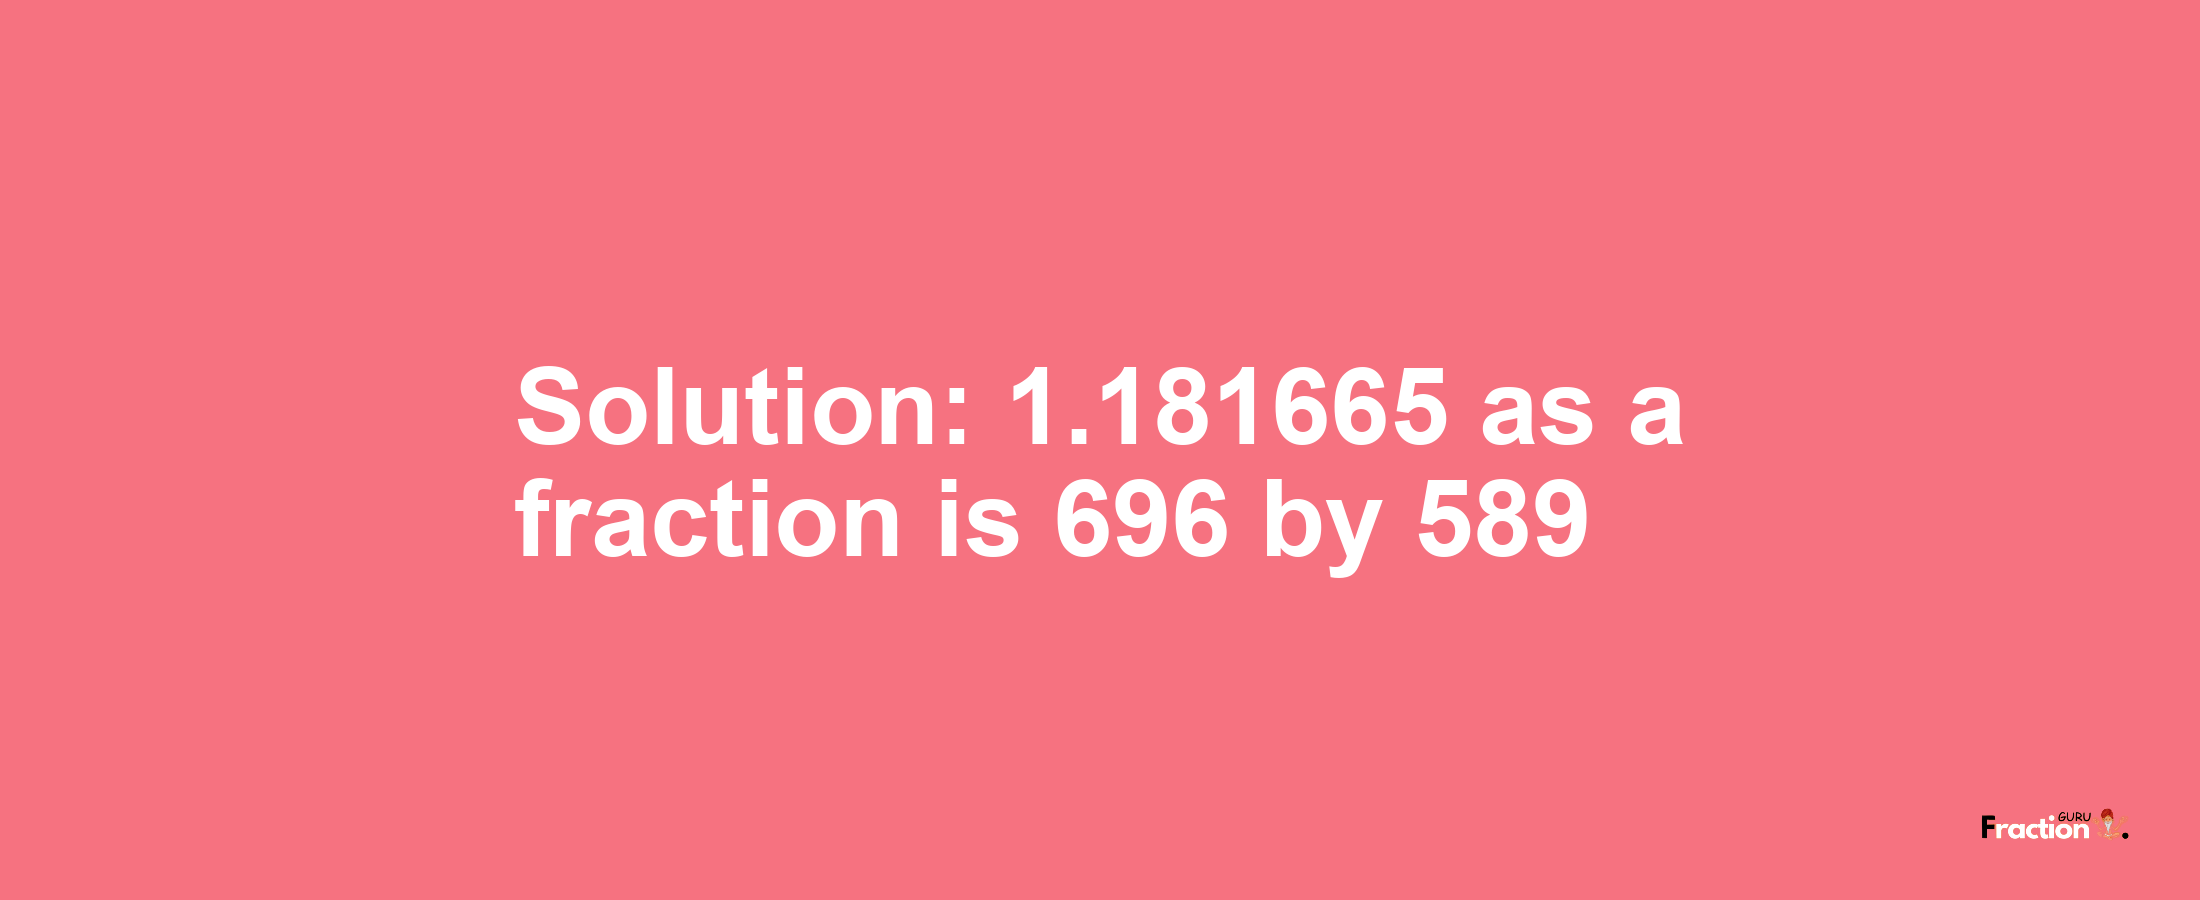 Solution:1.181665 as a fraction is 696/589